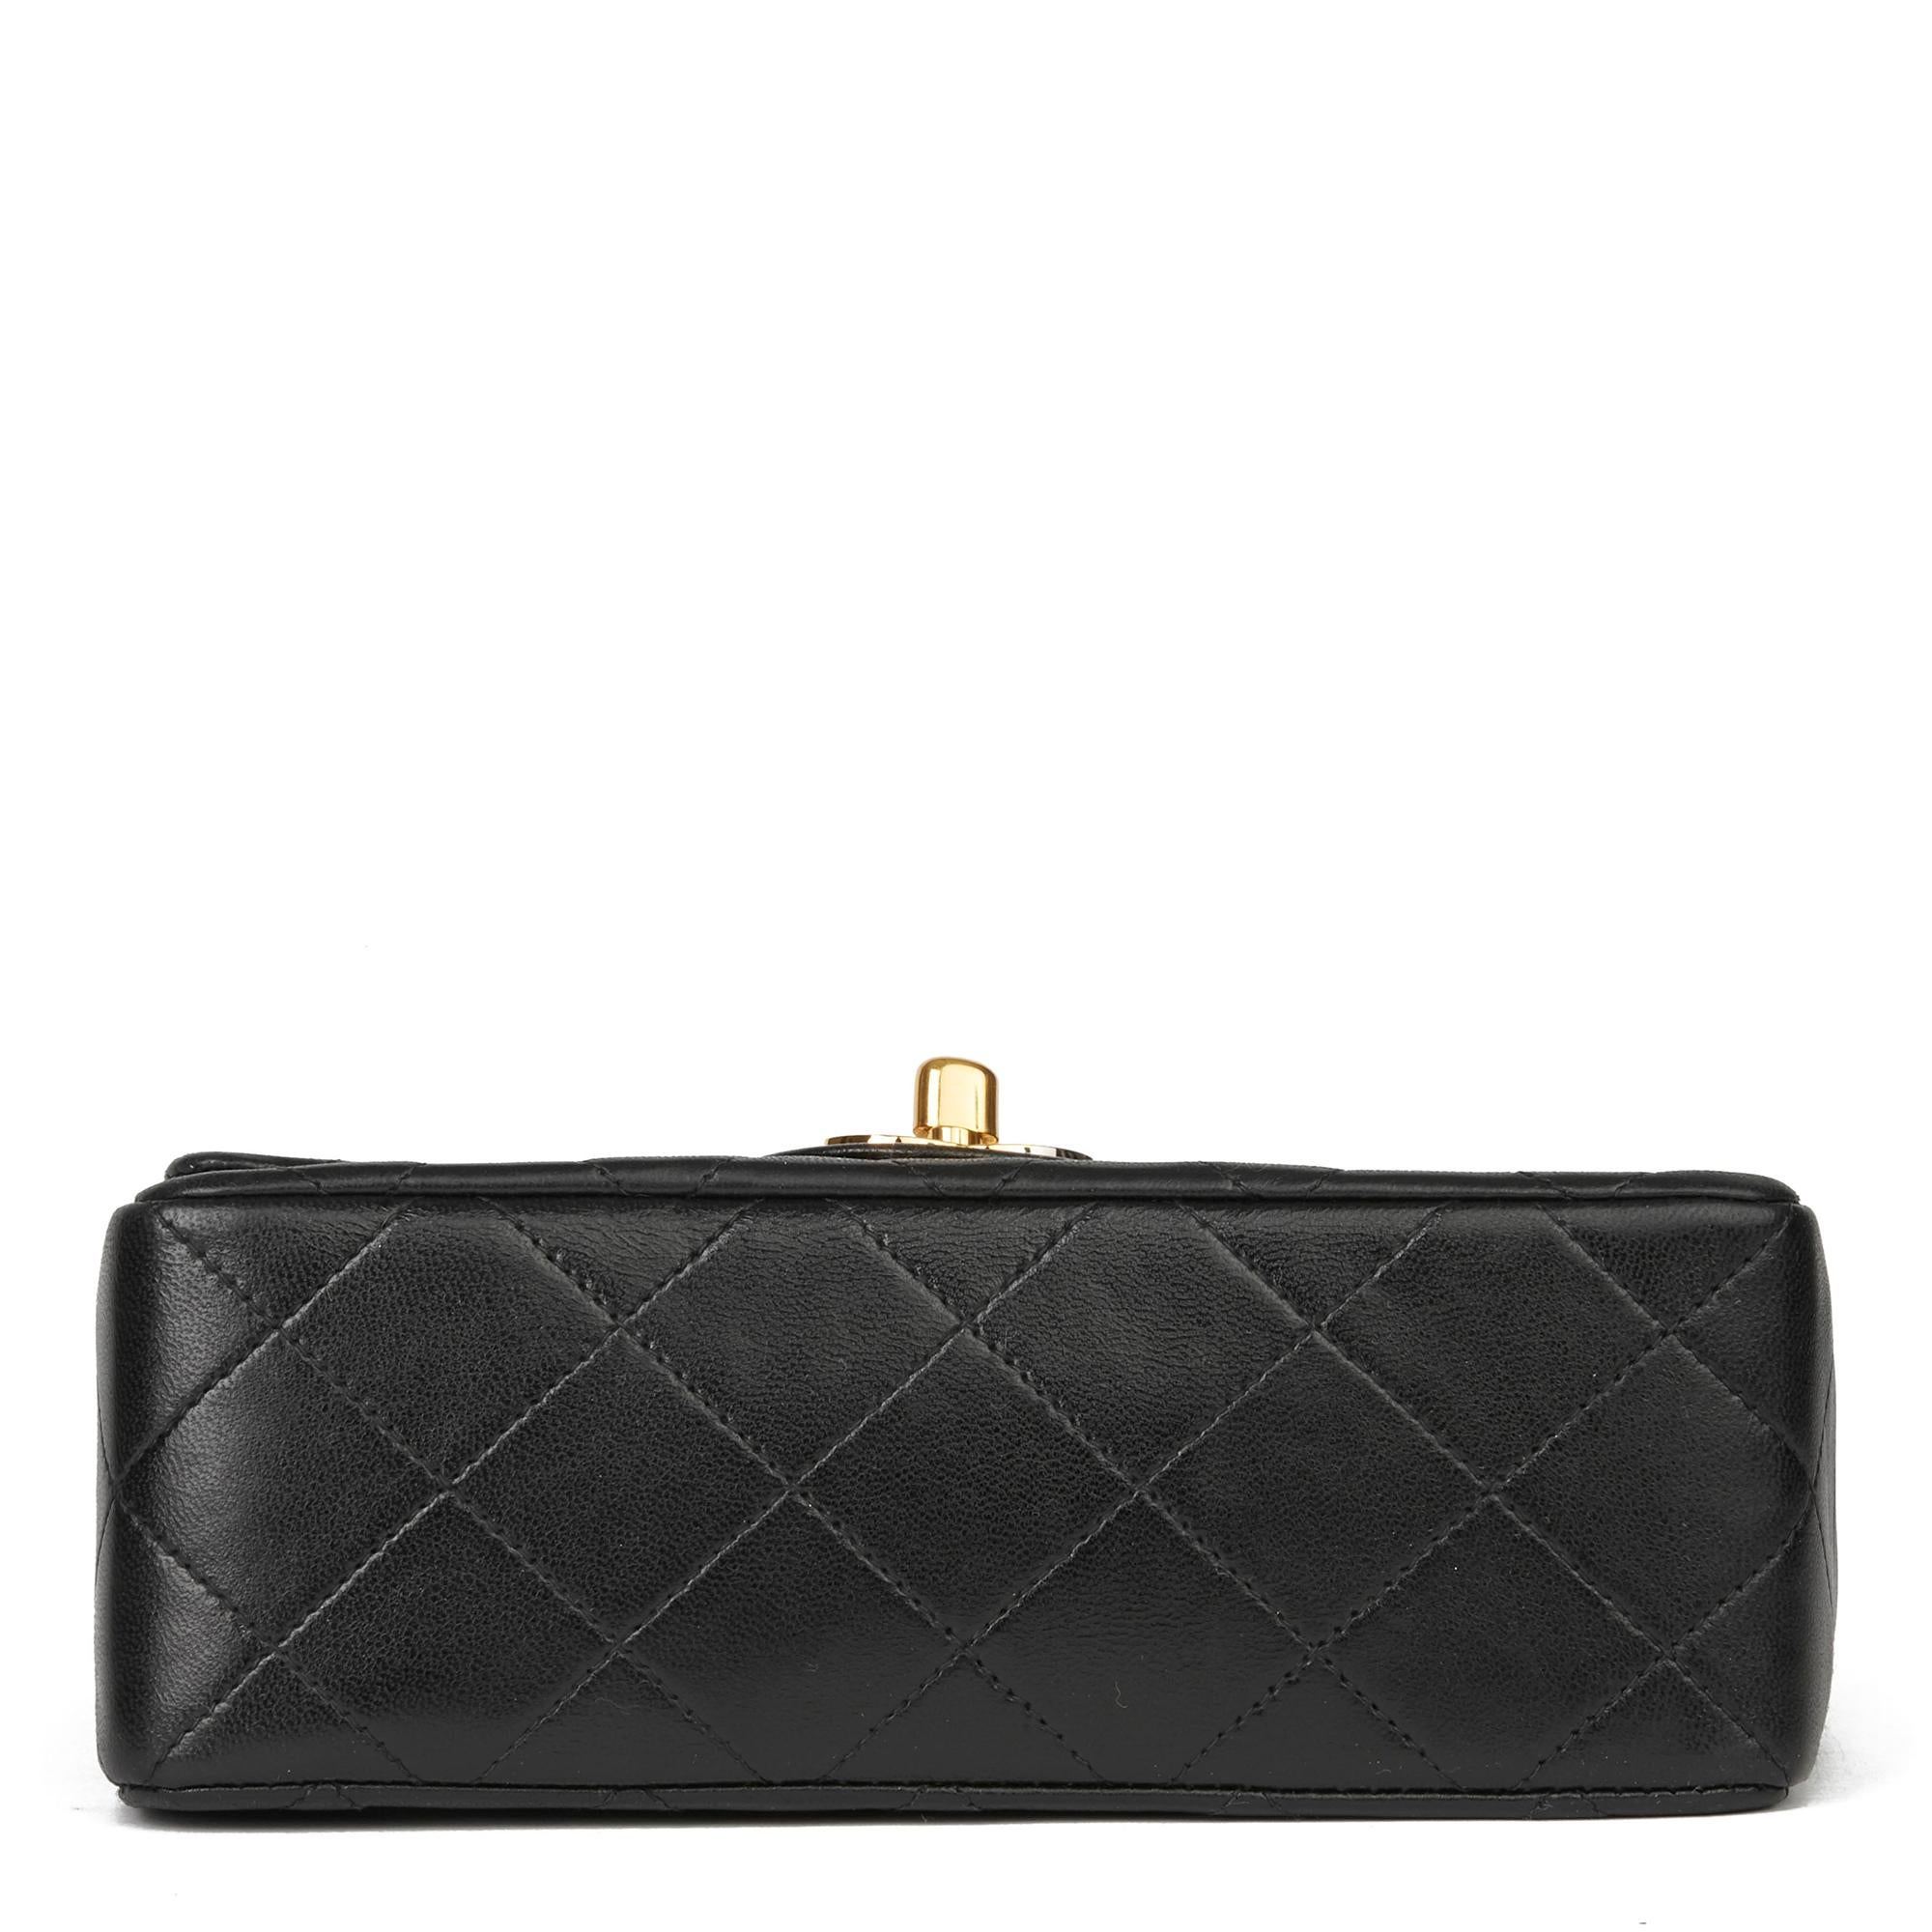 Women's 1994 Chanel Black Quilted Lambskin Vintage Mini Flap Bag